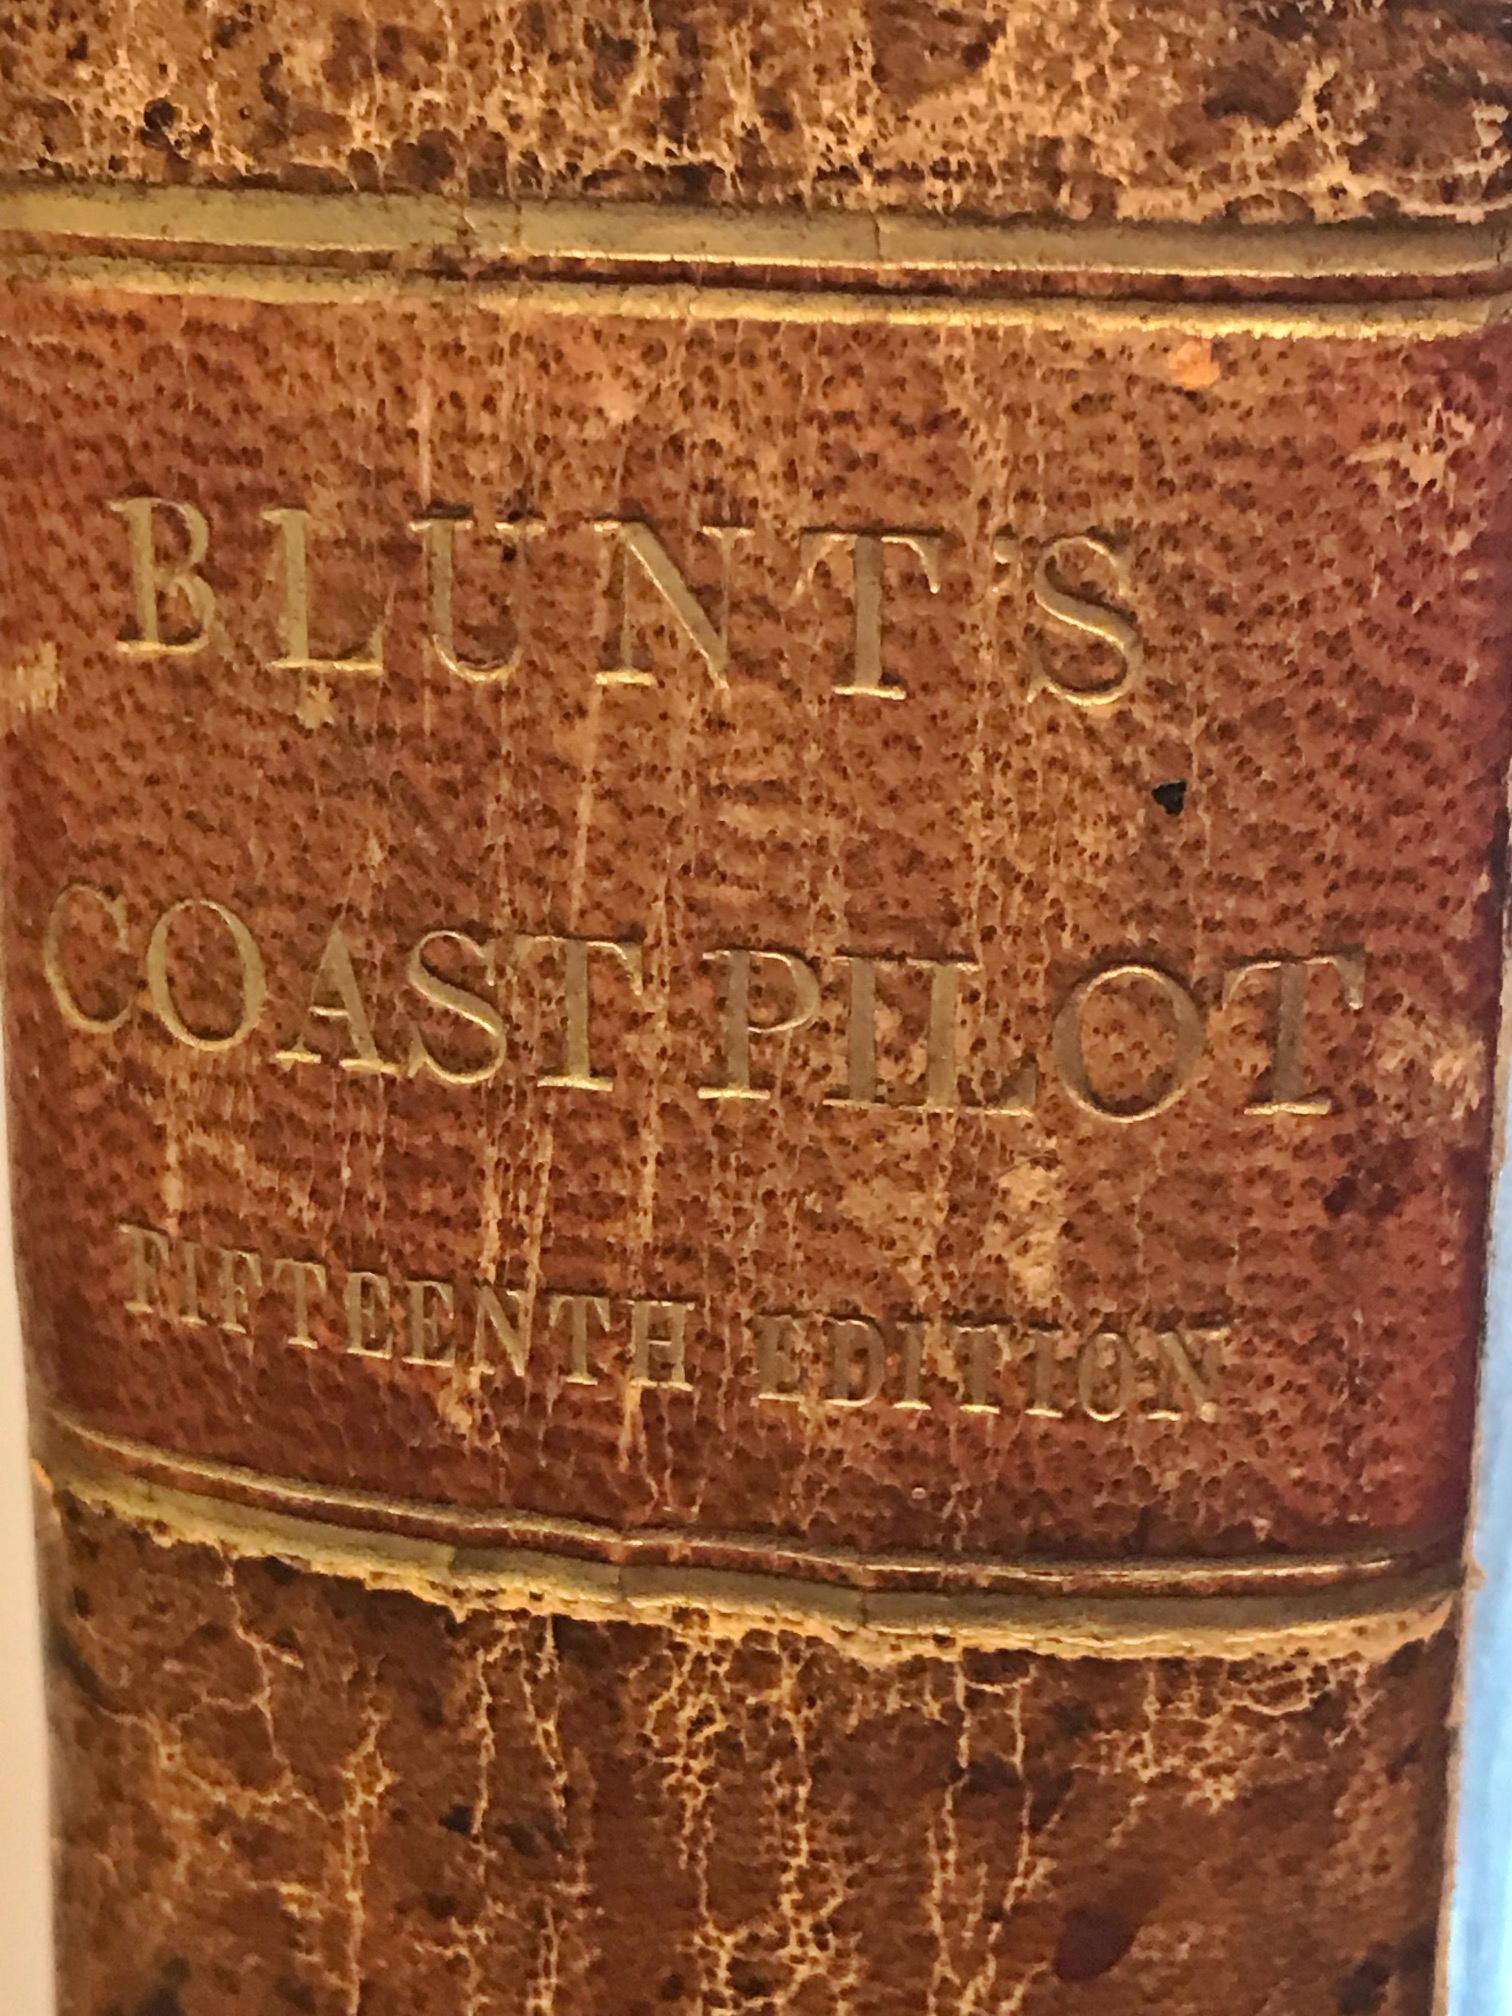 The American Coast Pilot; containing Directions for the Principal Harbors, Capes and Headlands, on the Coasts of North and South America: describing the Soundings, Bearings of the Lighthouses and Beacons from the Rocks, Shoals, Ledges, &c. with the